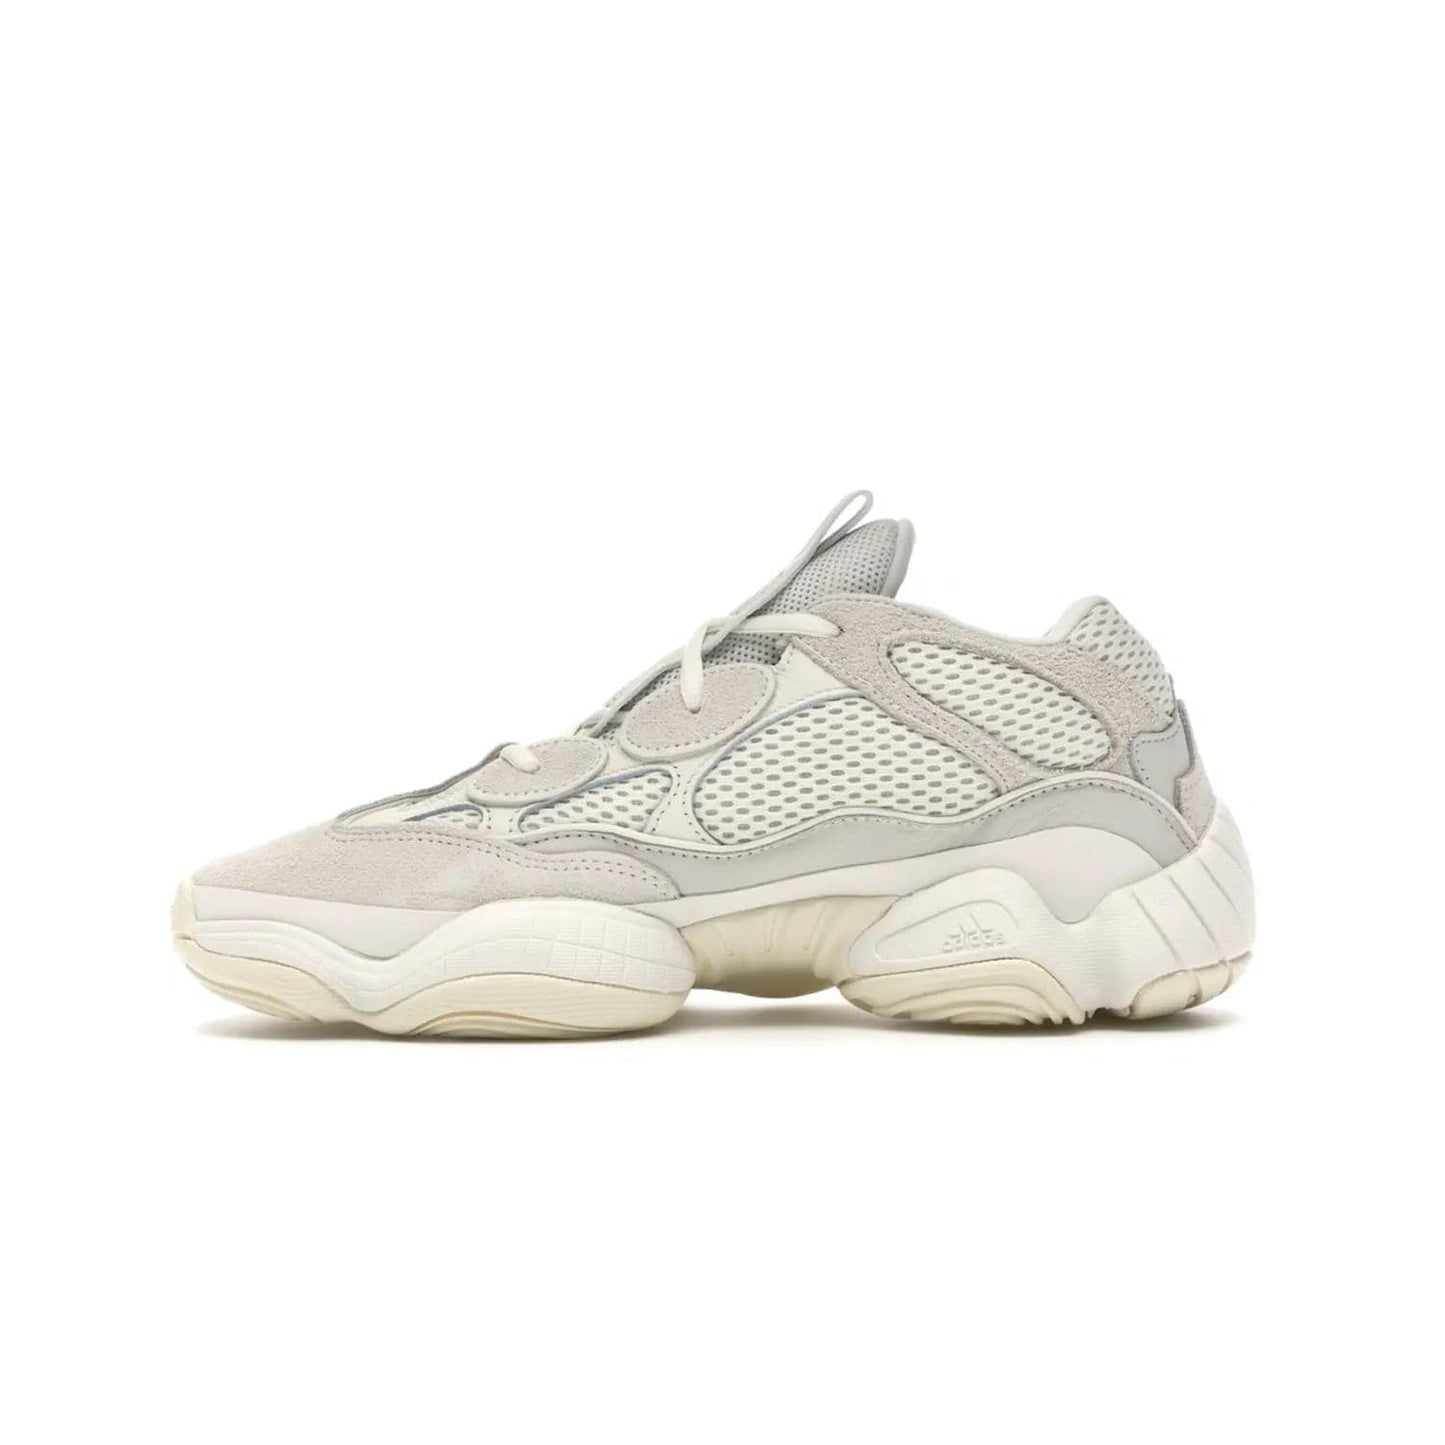 adidas Yeezy 500 Bone White - Image 19 - Only at www.BallersClubKickz.com - Classic look perfect for any sneaker collection. The adidas Yeezy 500 "Bone White" blends a white mesh upper with suede overlays & a chunky midsole inspired by the Adidas KB3. Complimented by a tonal-cream outsole, this timeless style is a must-have.